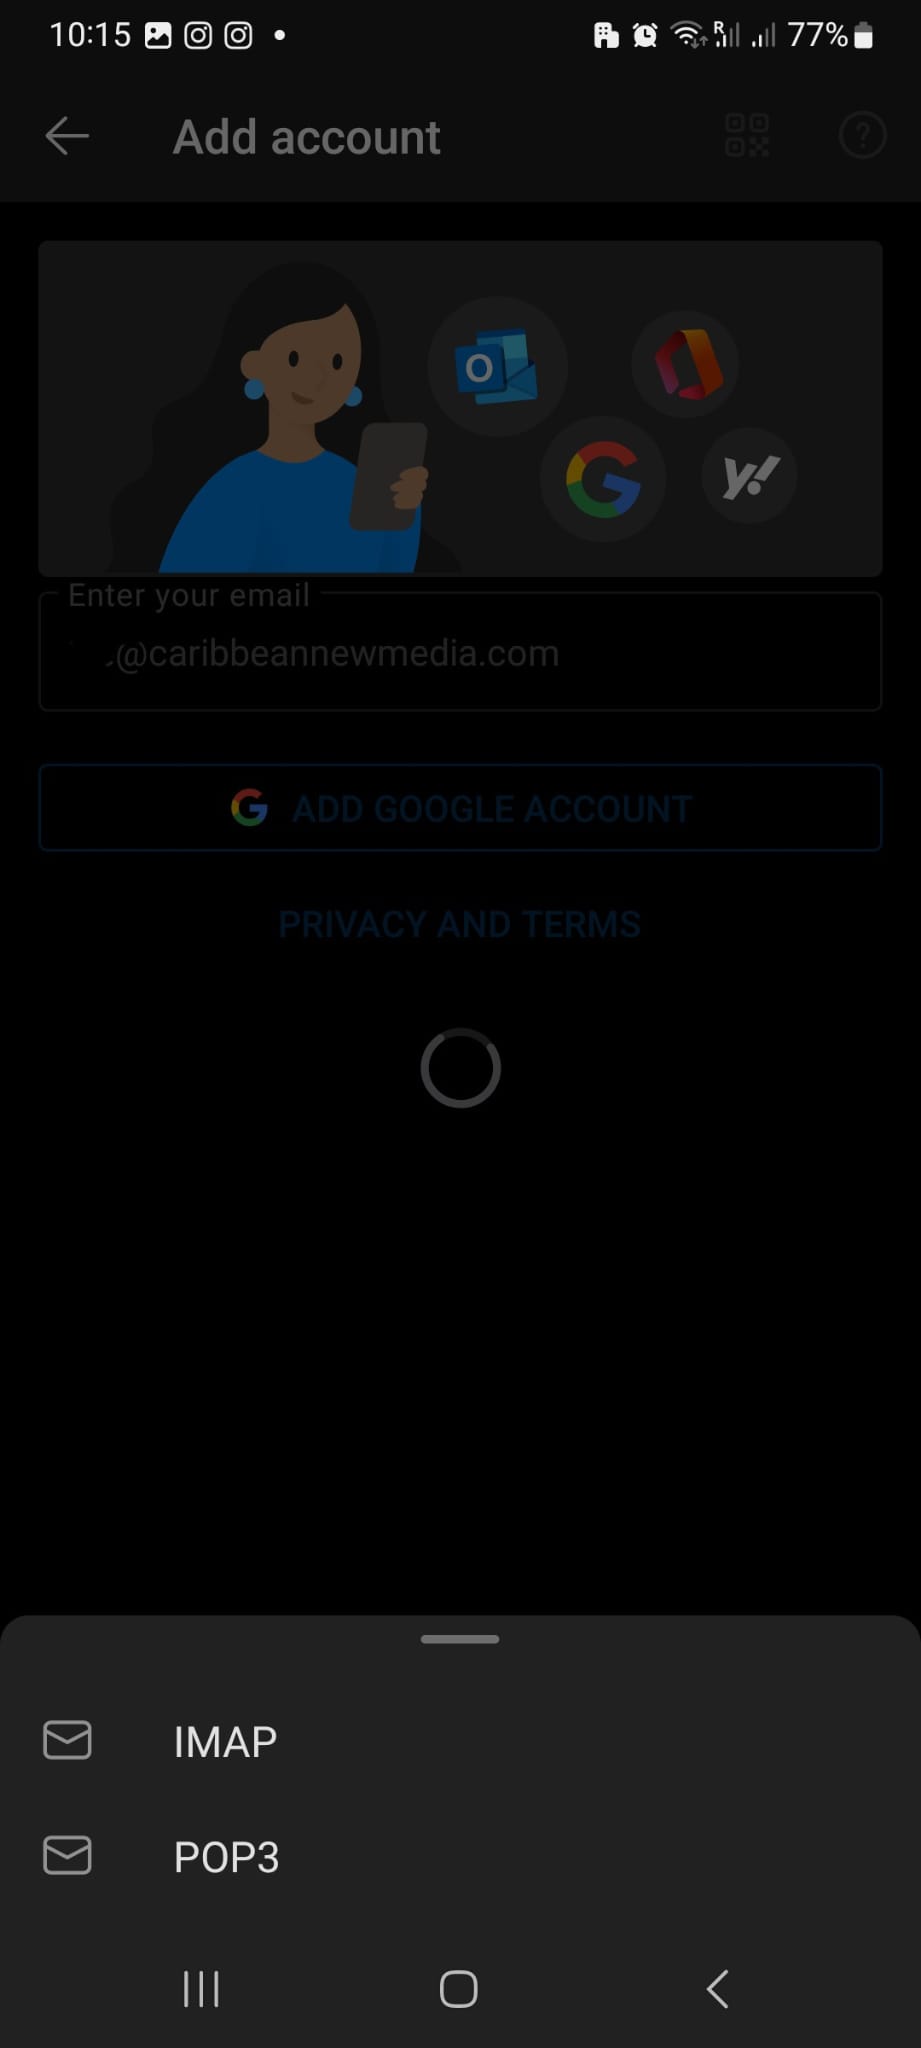 Samsung email app account type